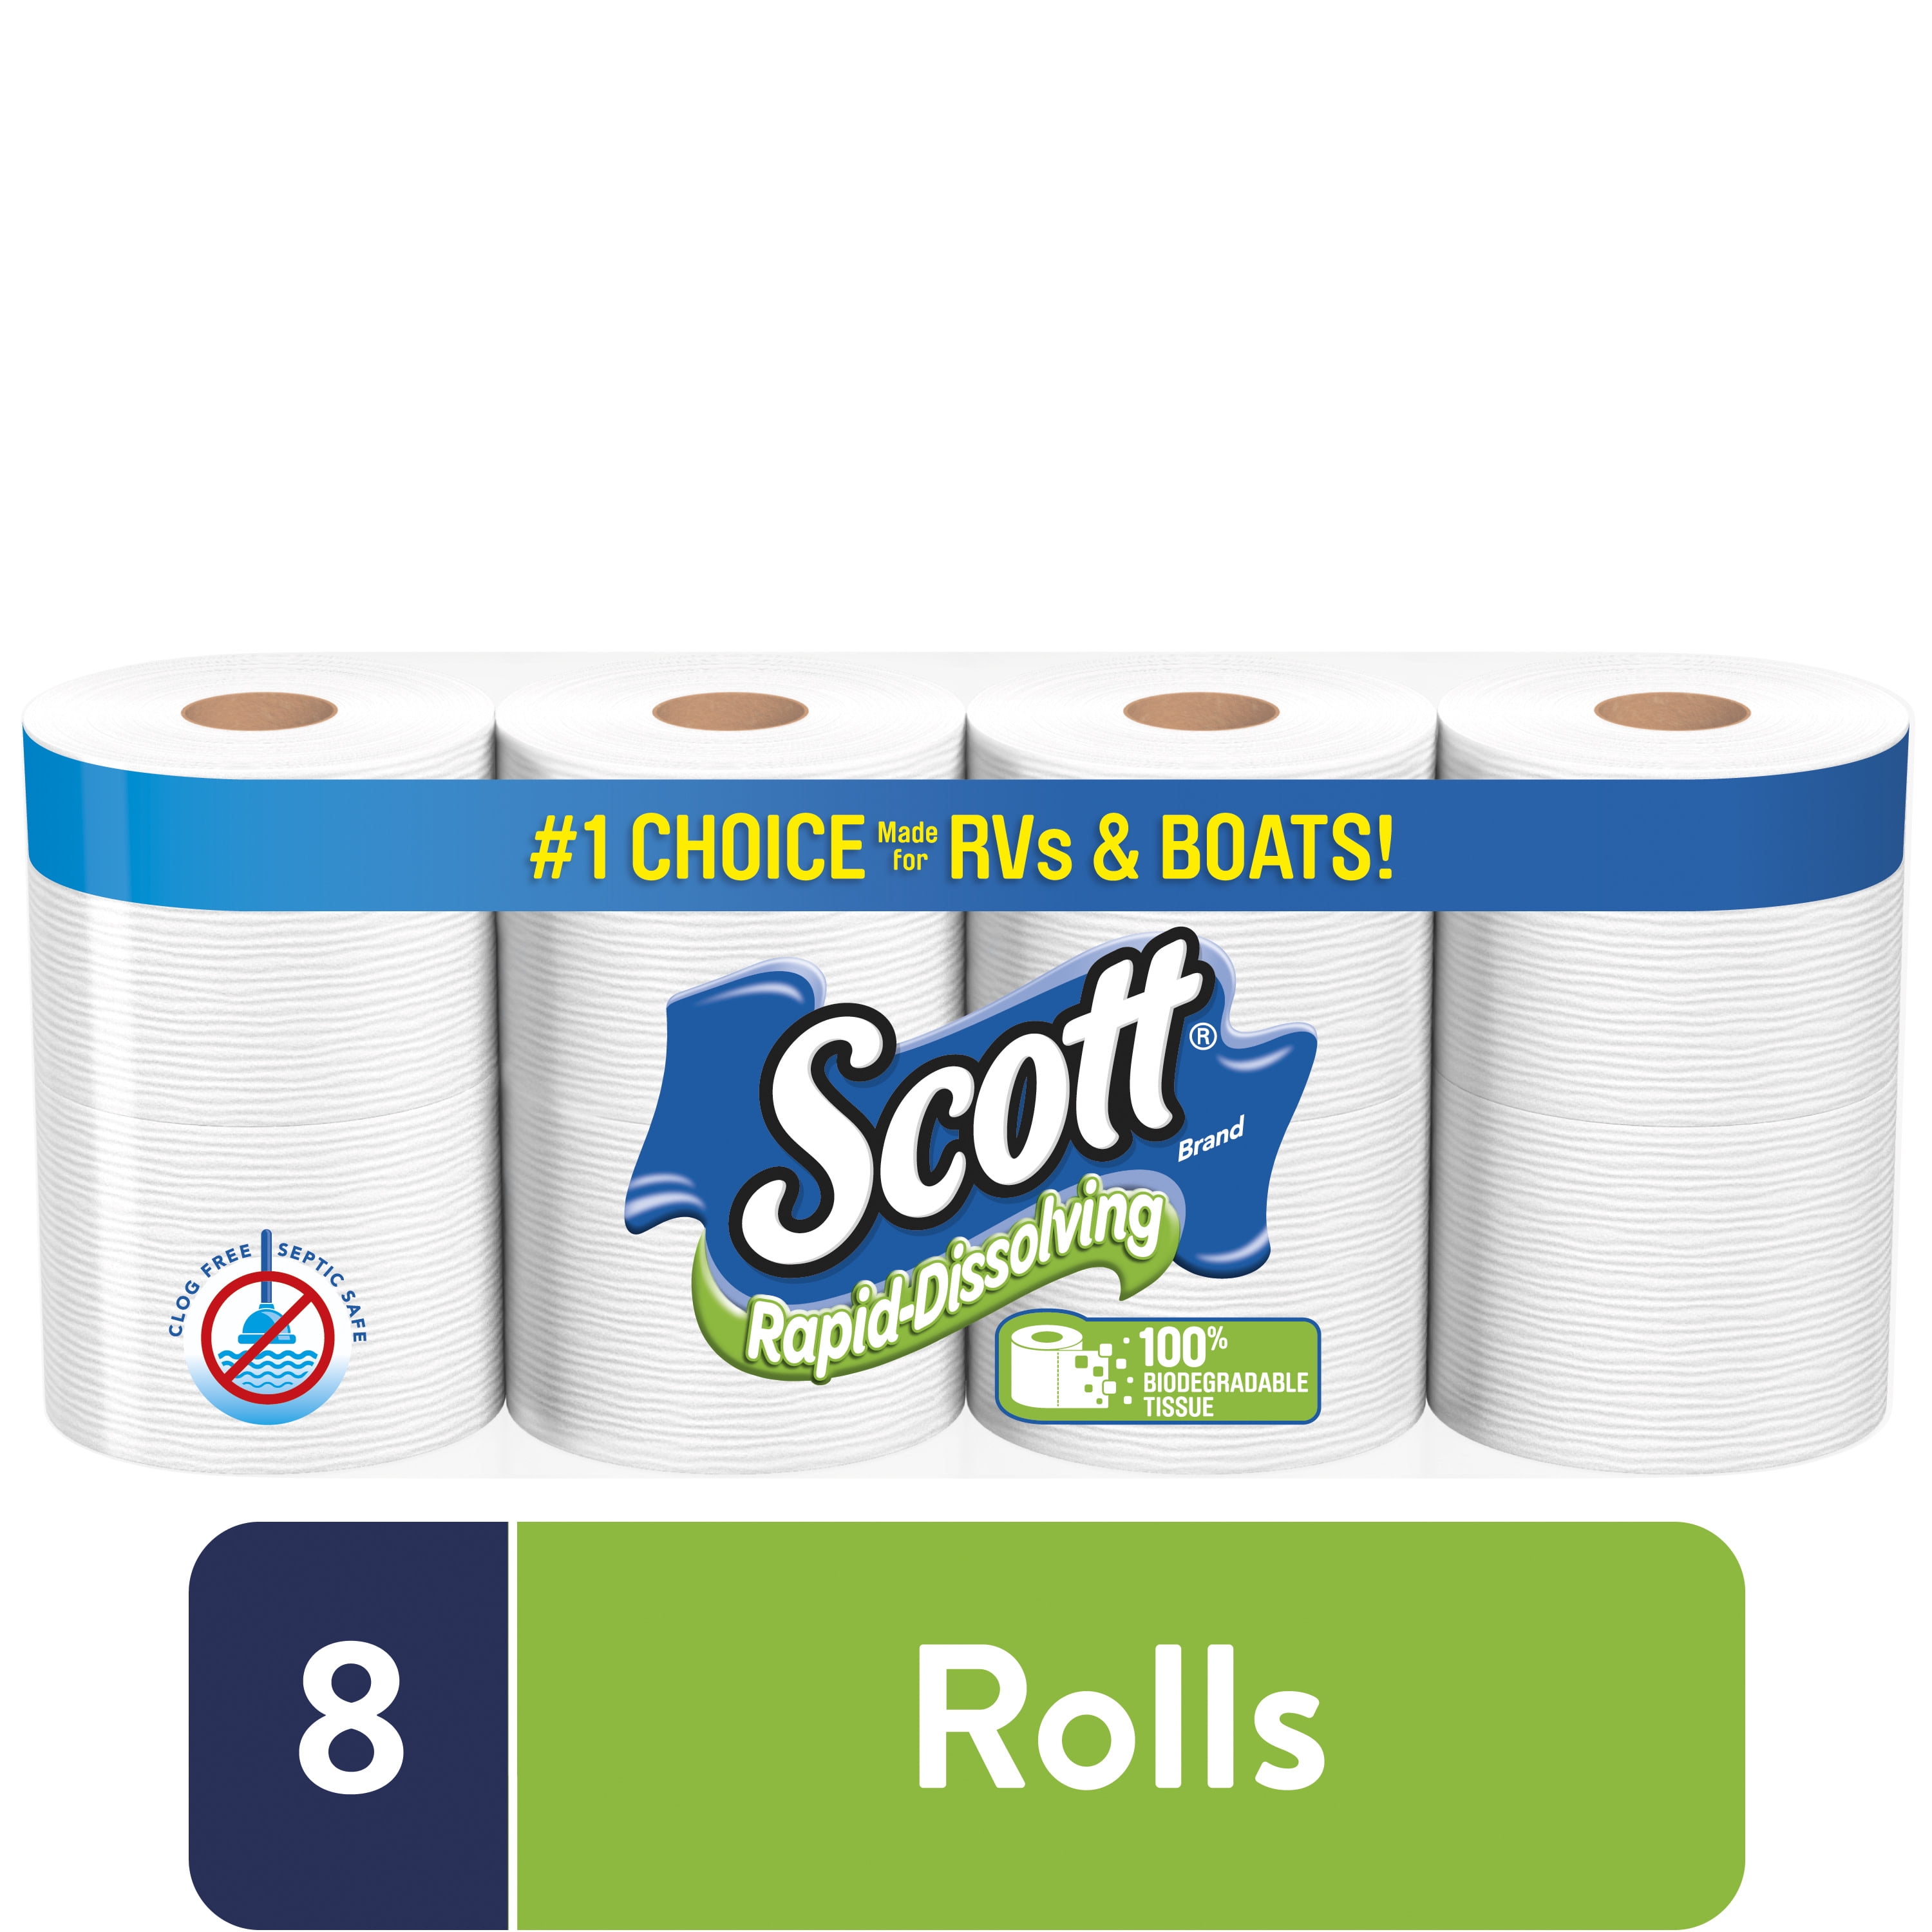 Roll Septic Tank RV Safe Boat Ply NEW Scott Toilet Paper 12 Rolls 1000 Sheets 